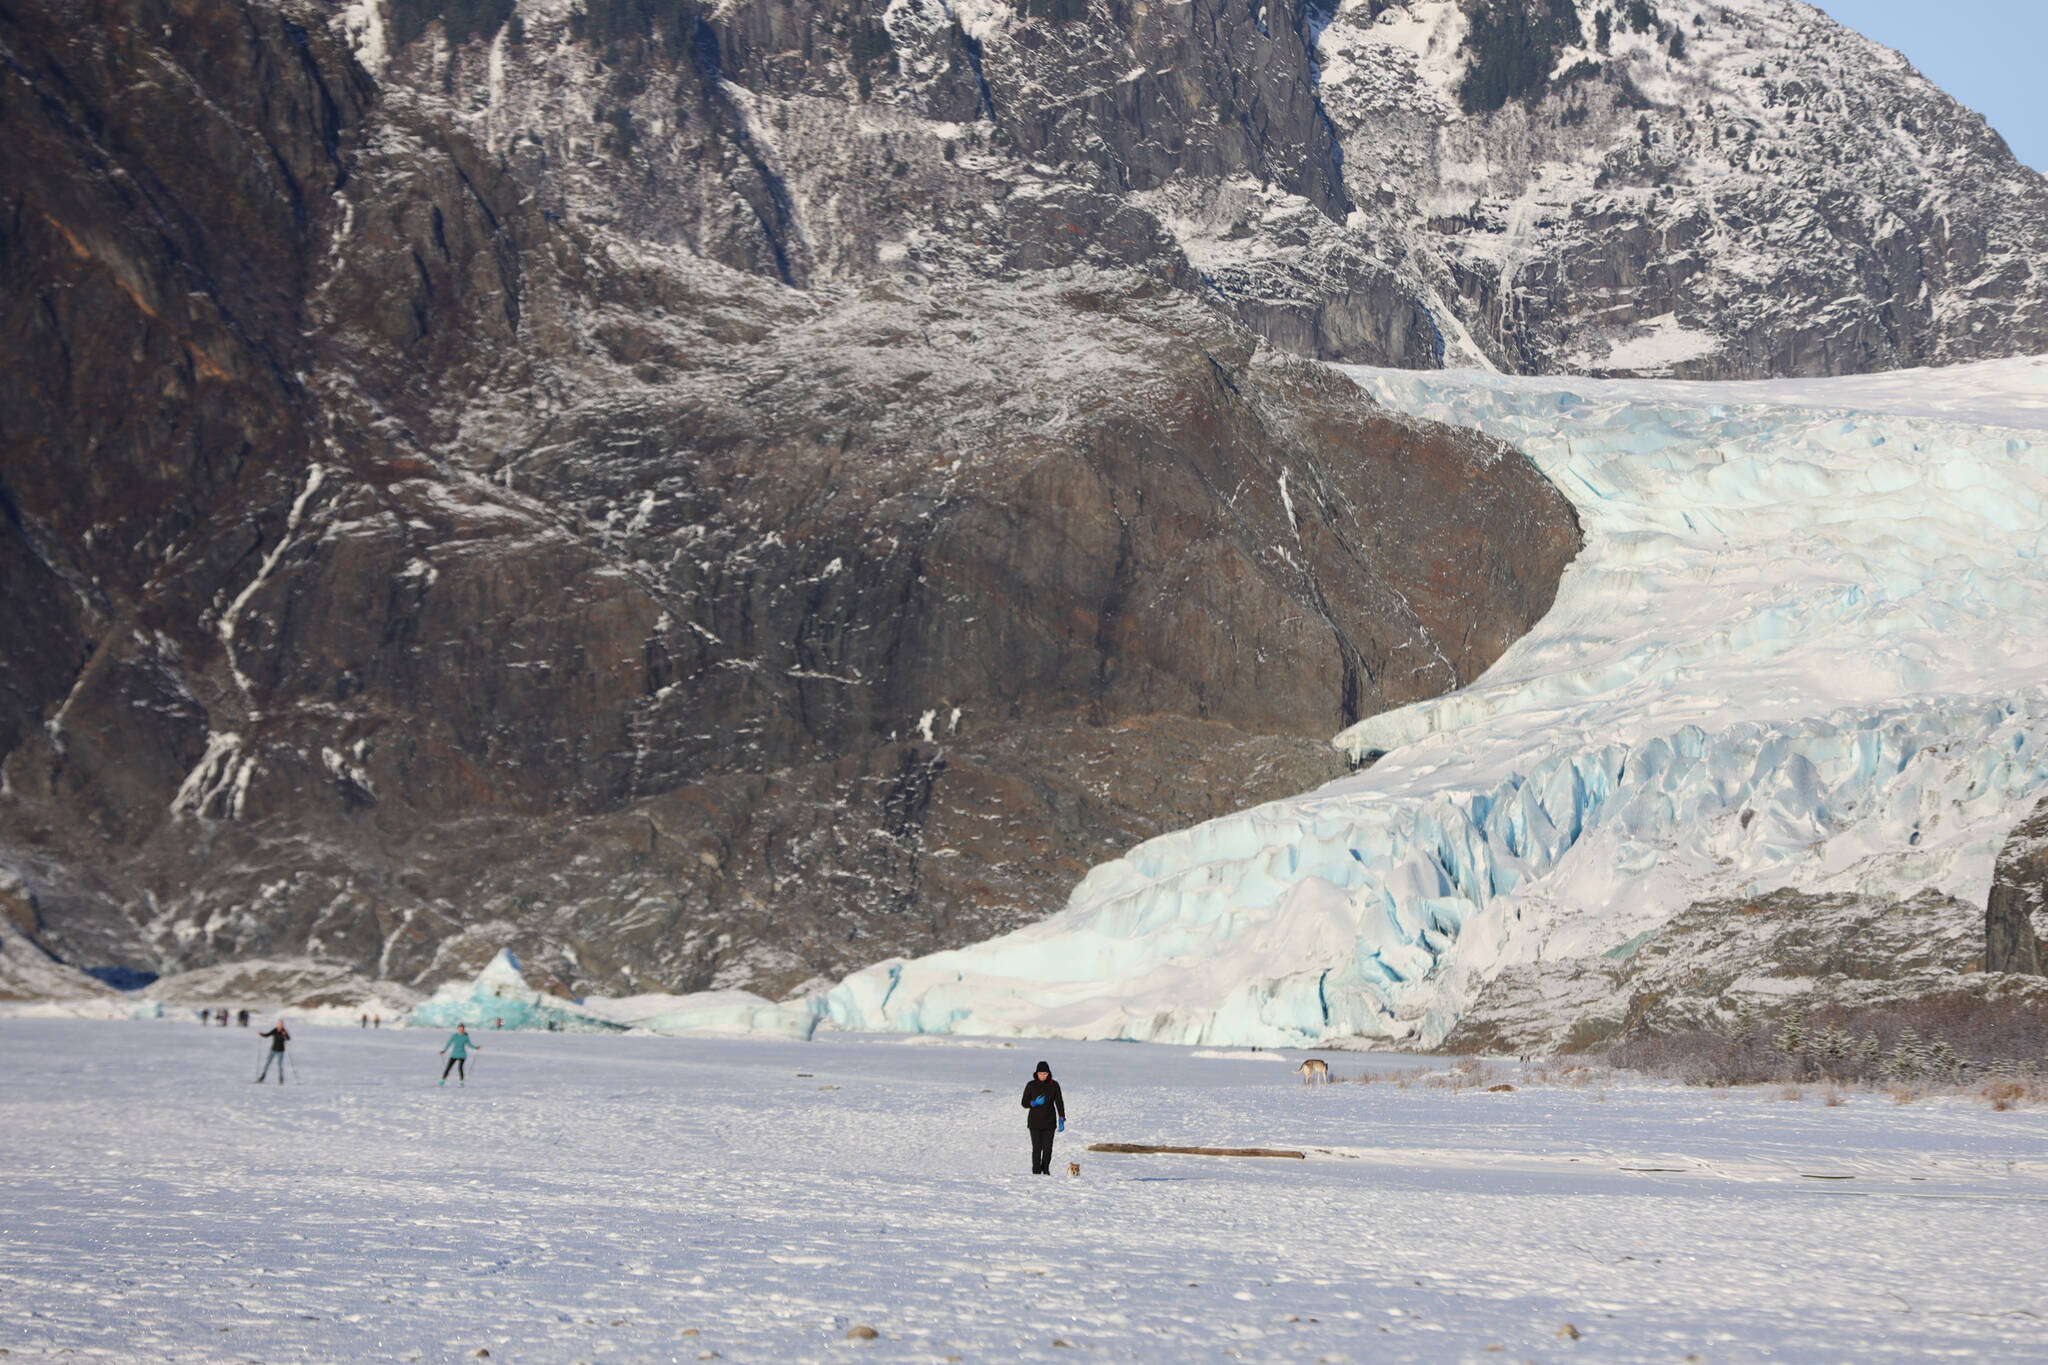 People and dogs traverse the frozen surface Mendenhall Lake on Monday afternoon. Officials said going on to any part of Mendenhall Lake can open up serious risks for falling into the freezing waters. (Clarise Larson / Juneau Empire)